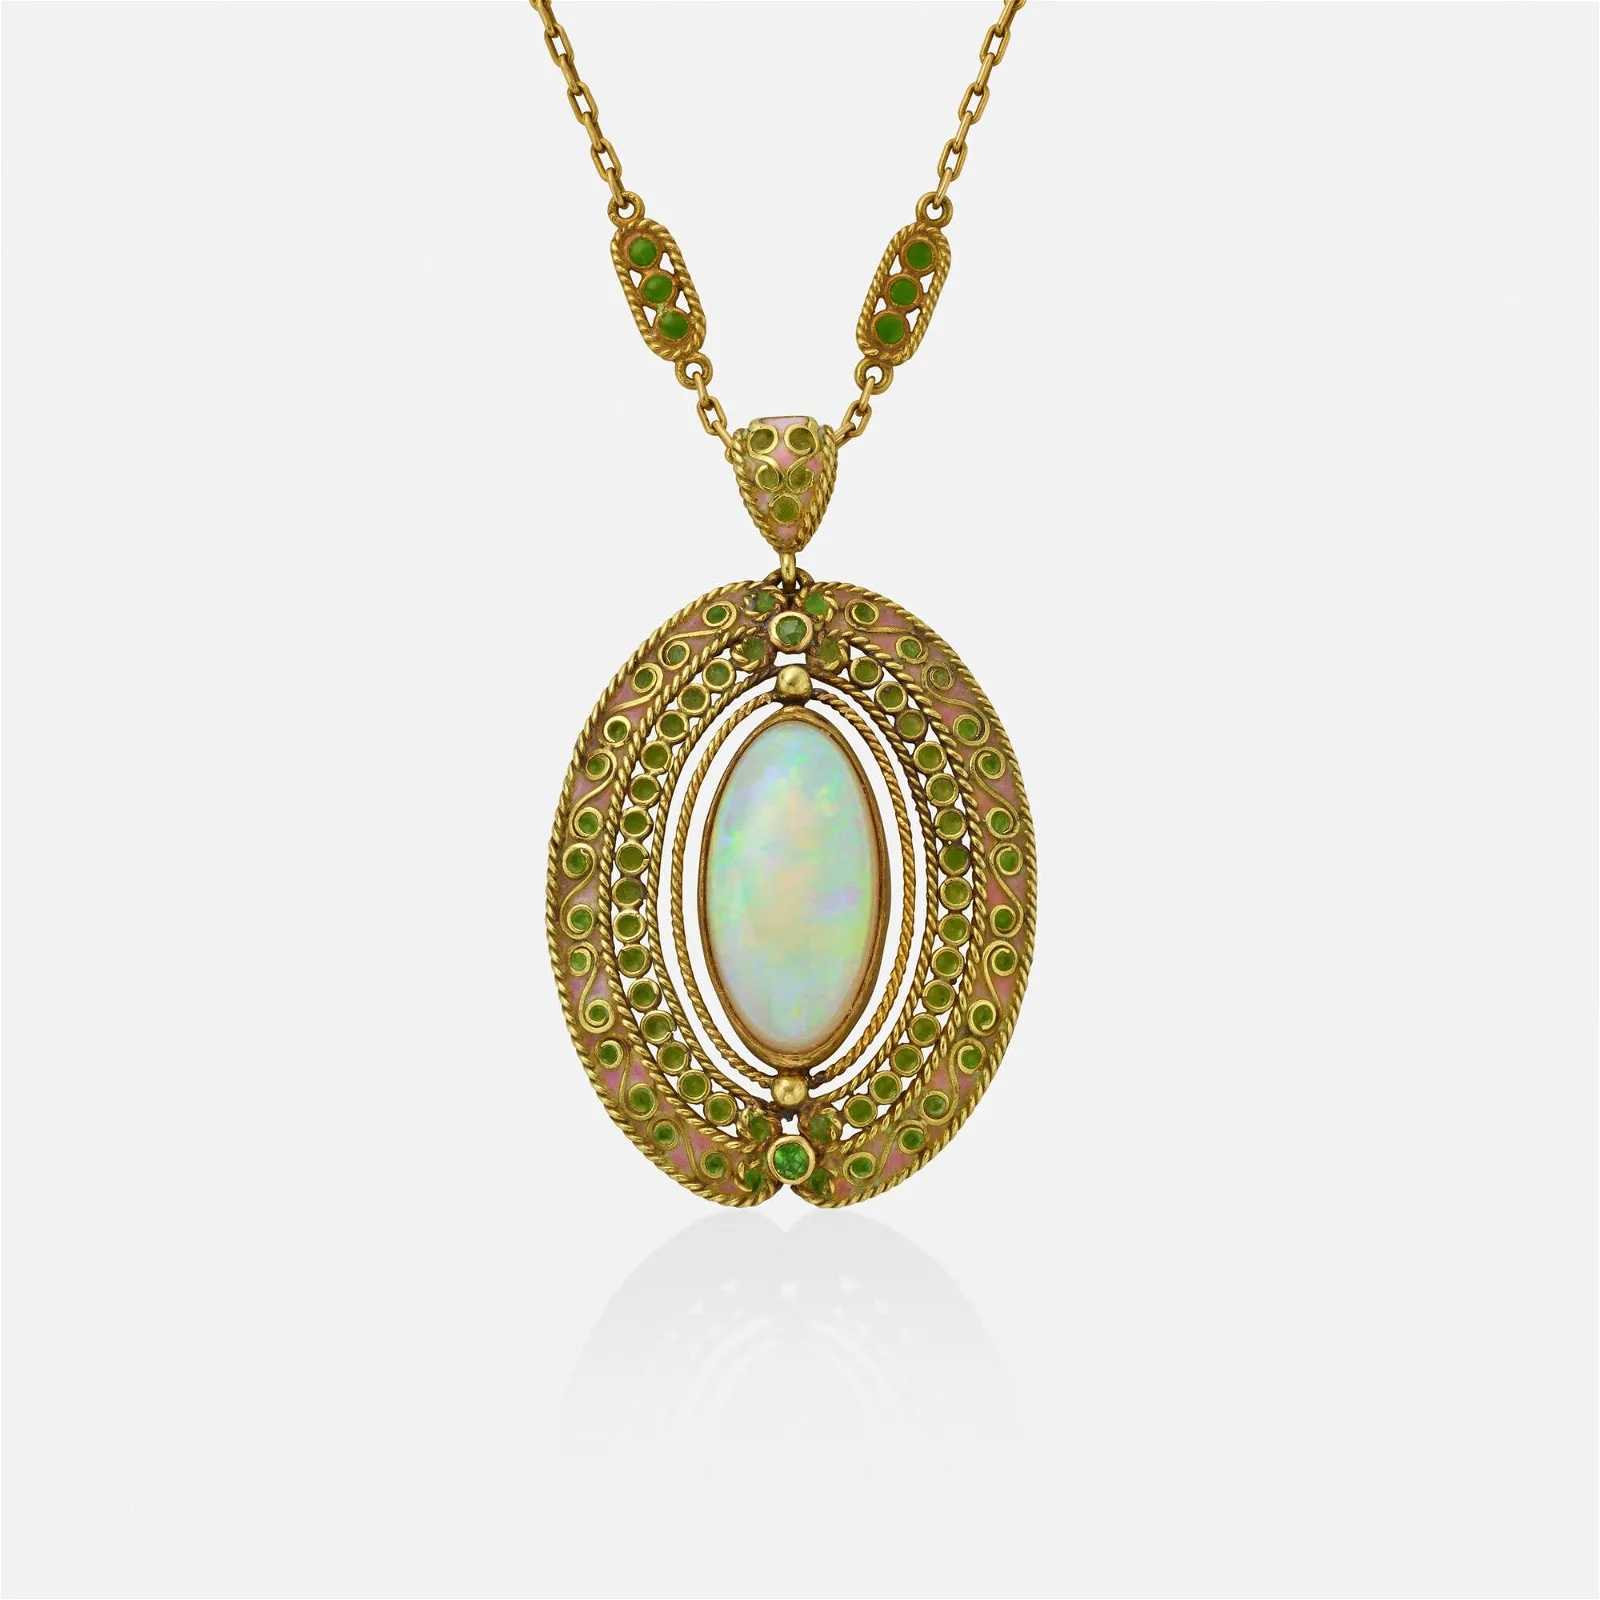 Louis Comfort Tiffany for Tiffany & Co., Opal, demantoid garnet, and enamel necklace, estimated at $12,000-$18,000 at Toomey.